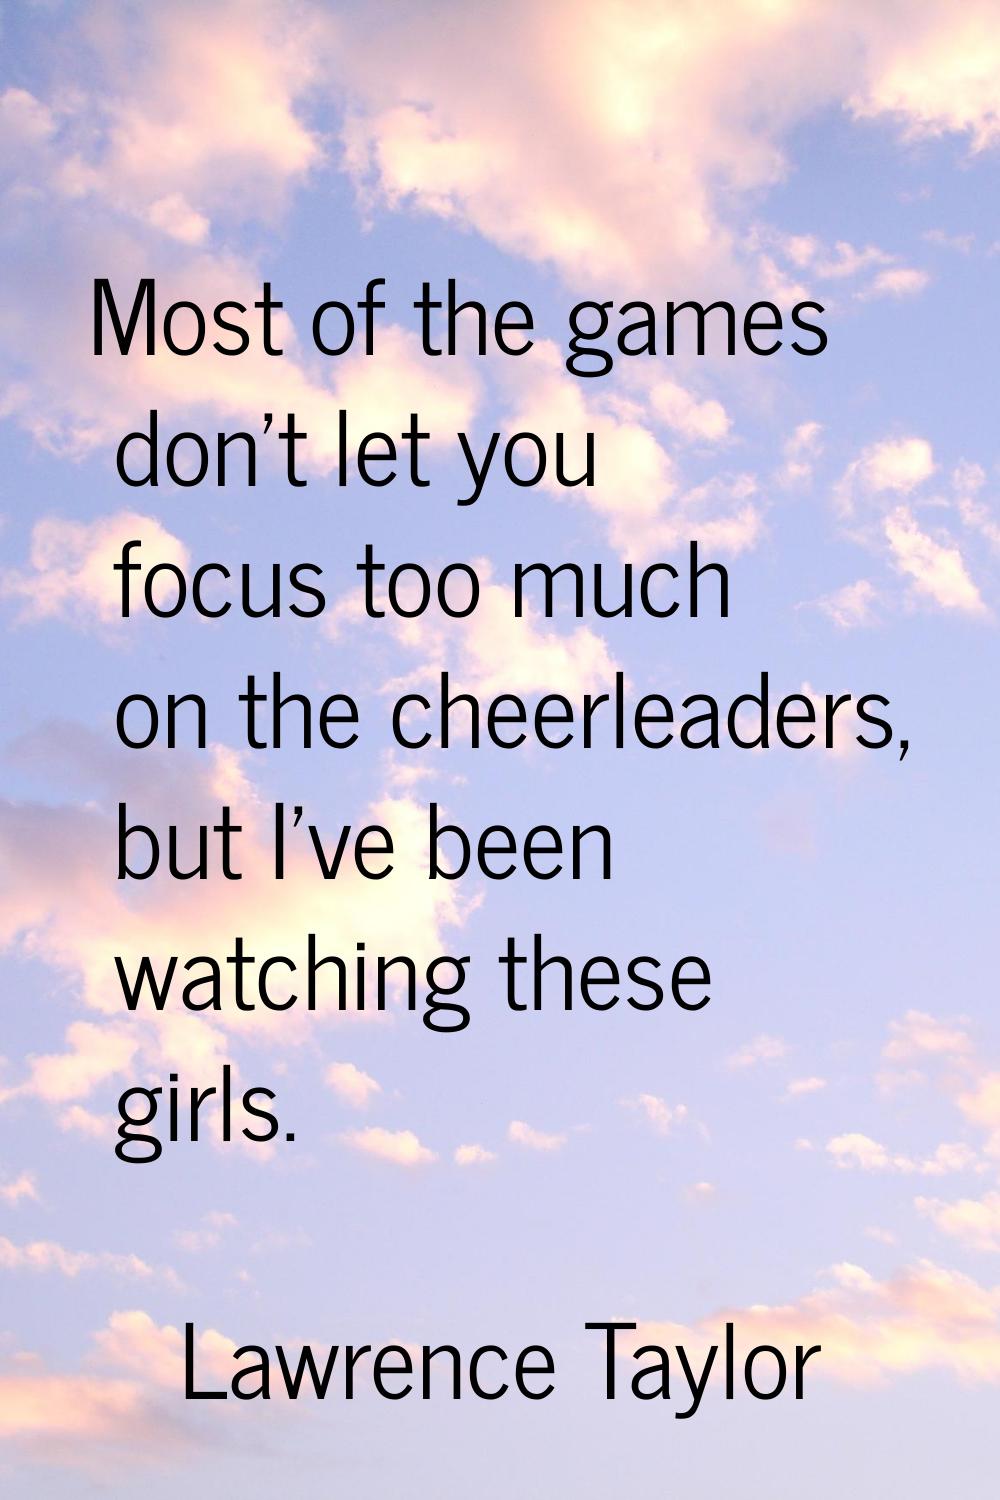 Most of the games don't let you focus too much on the cheerleaders, but I've been watching these gi